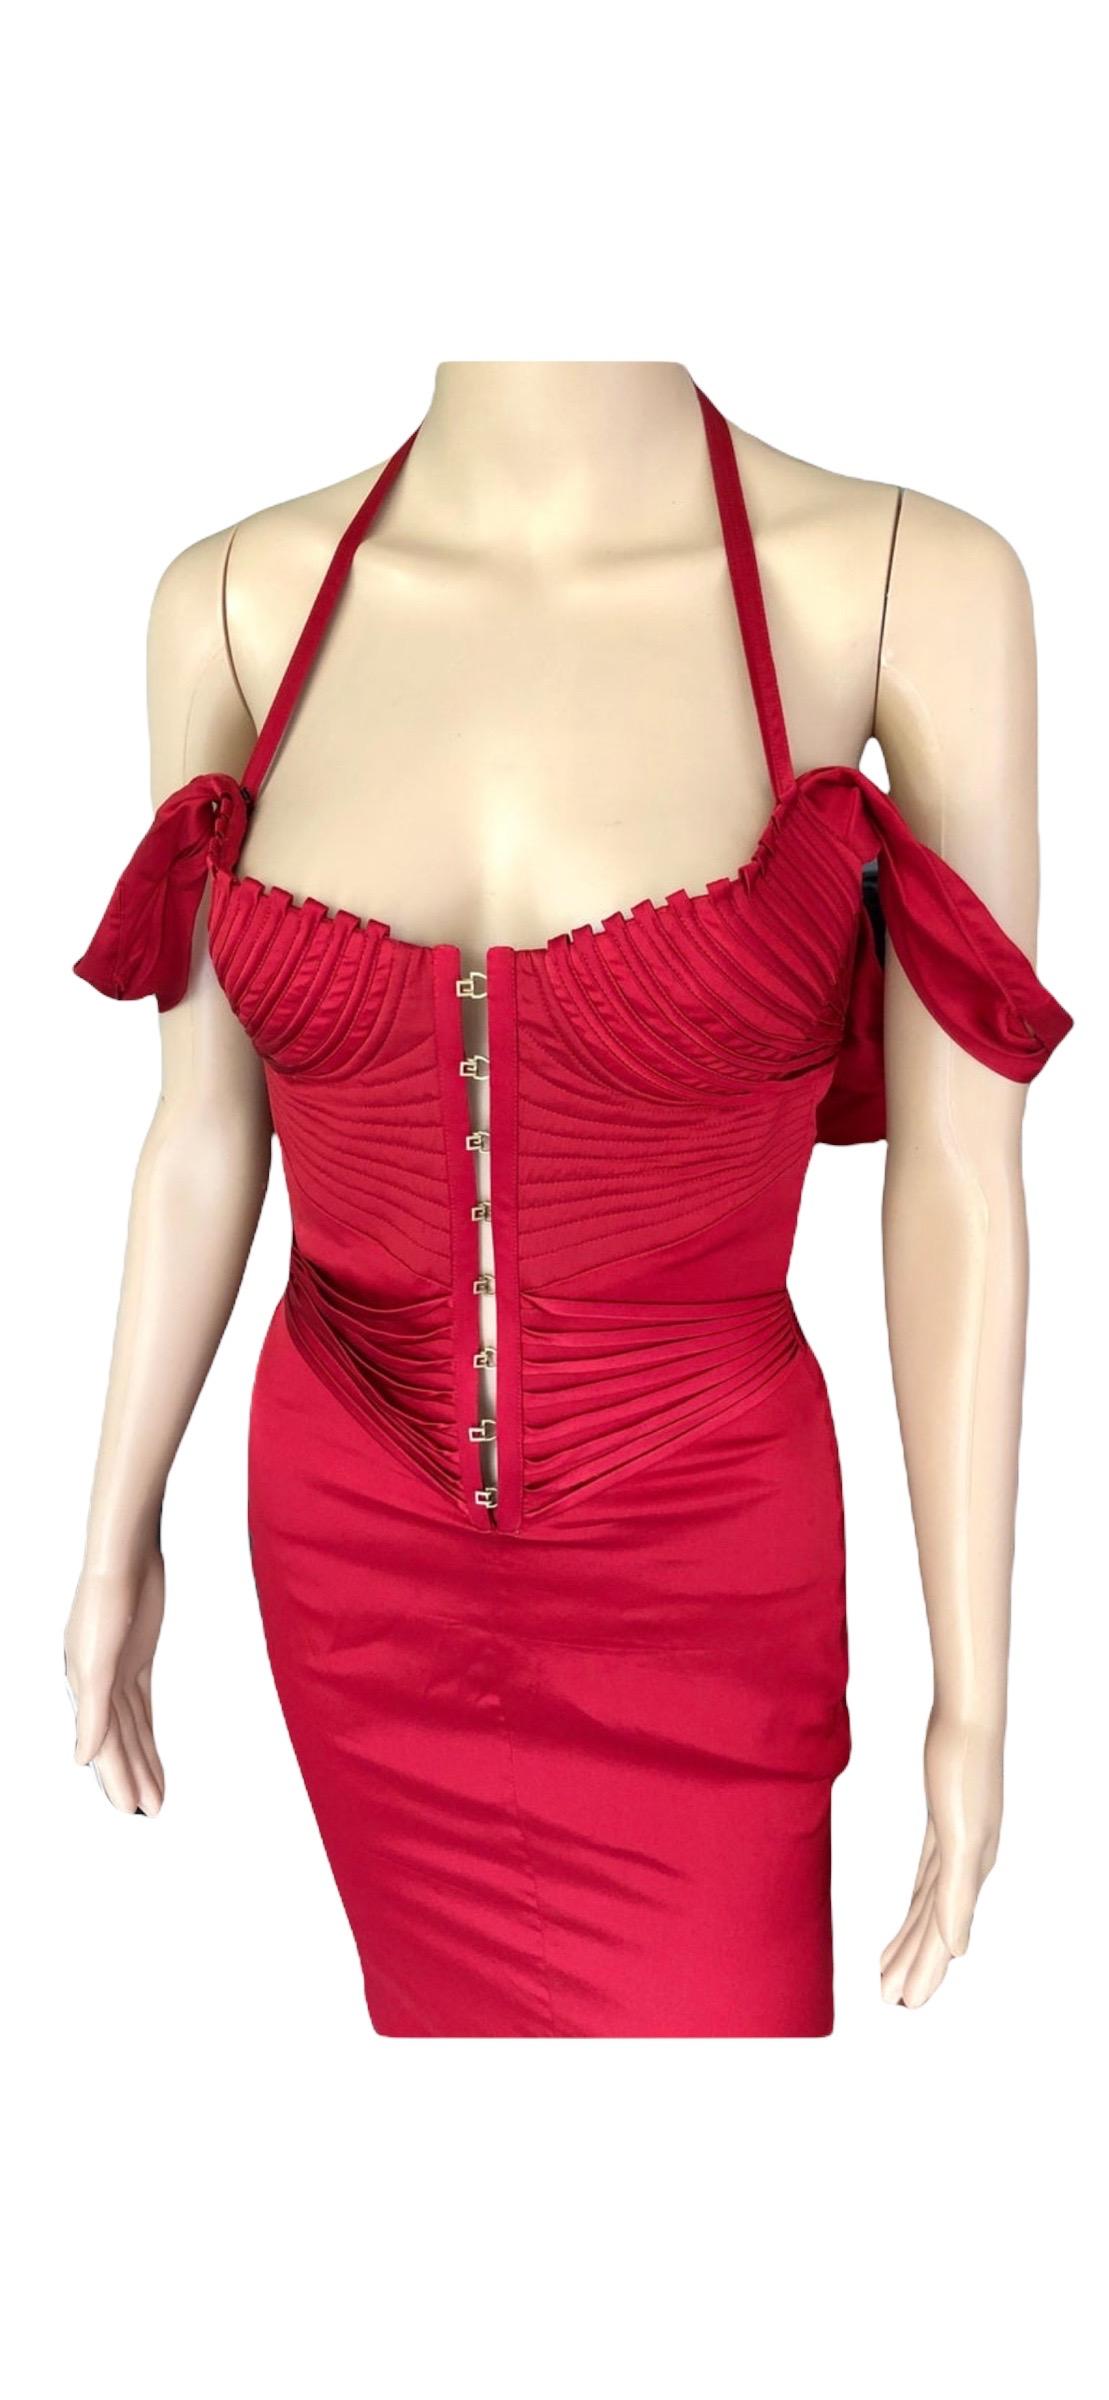 Tom Ford for Gucci F/W 2003 Runway Bustier Corset Silk Red Dress 7